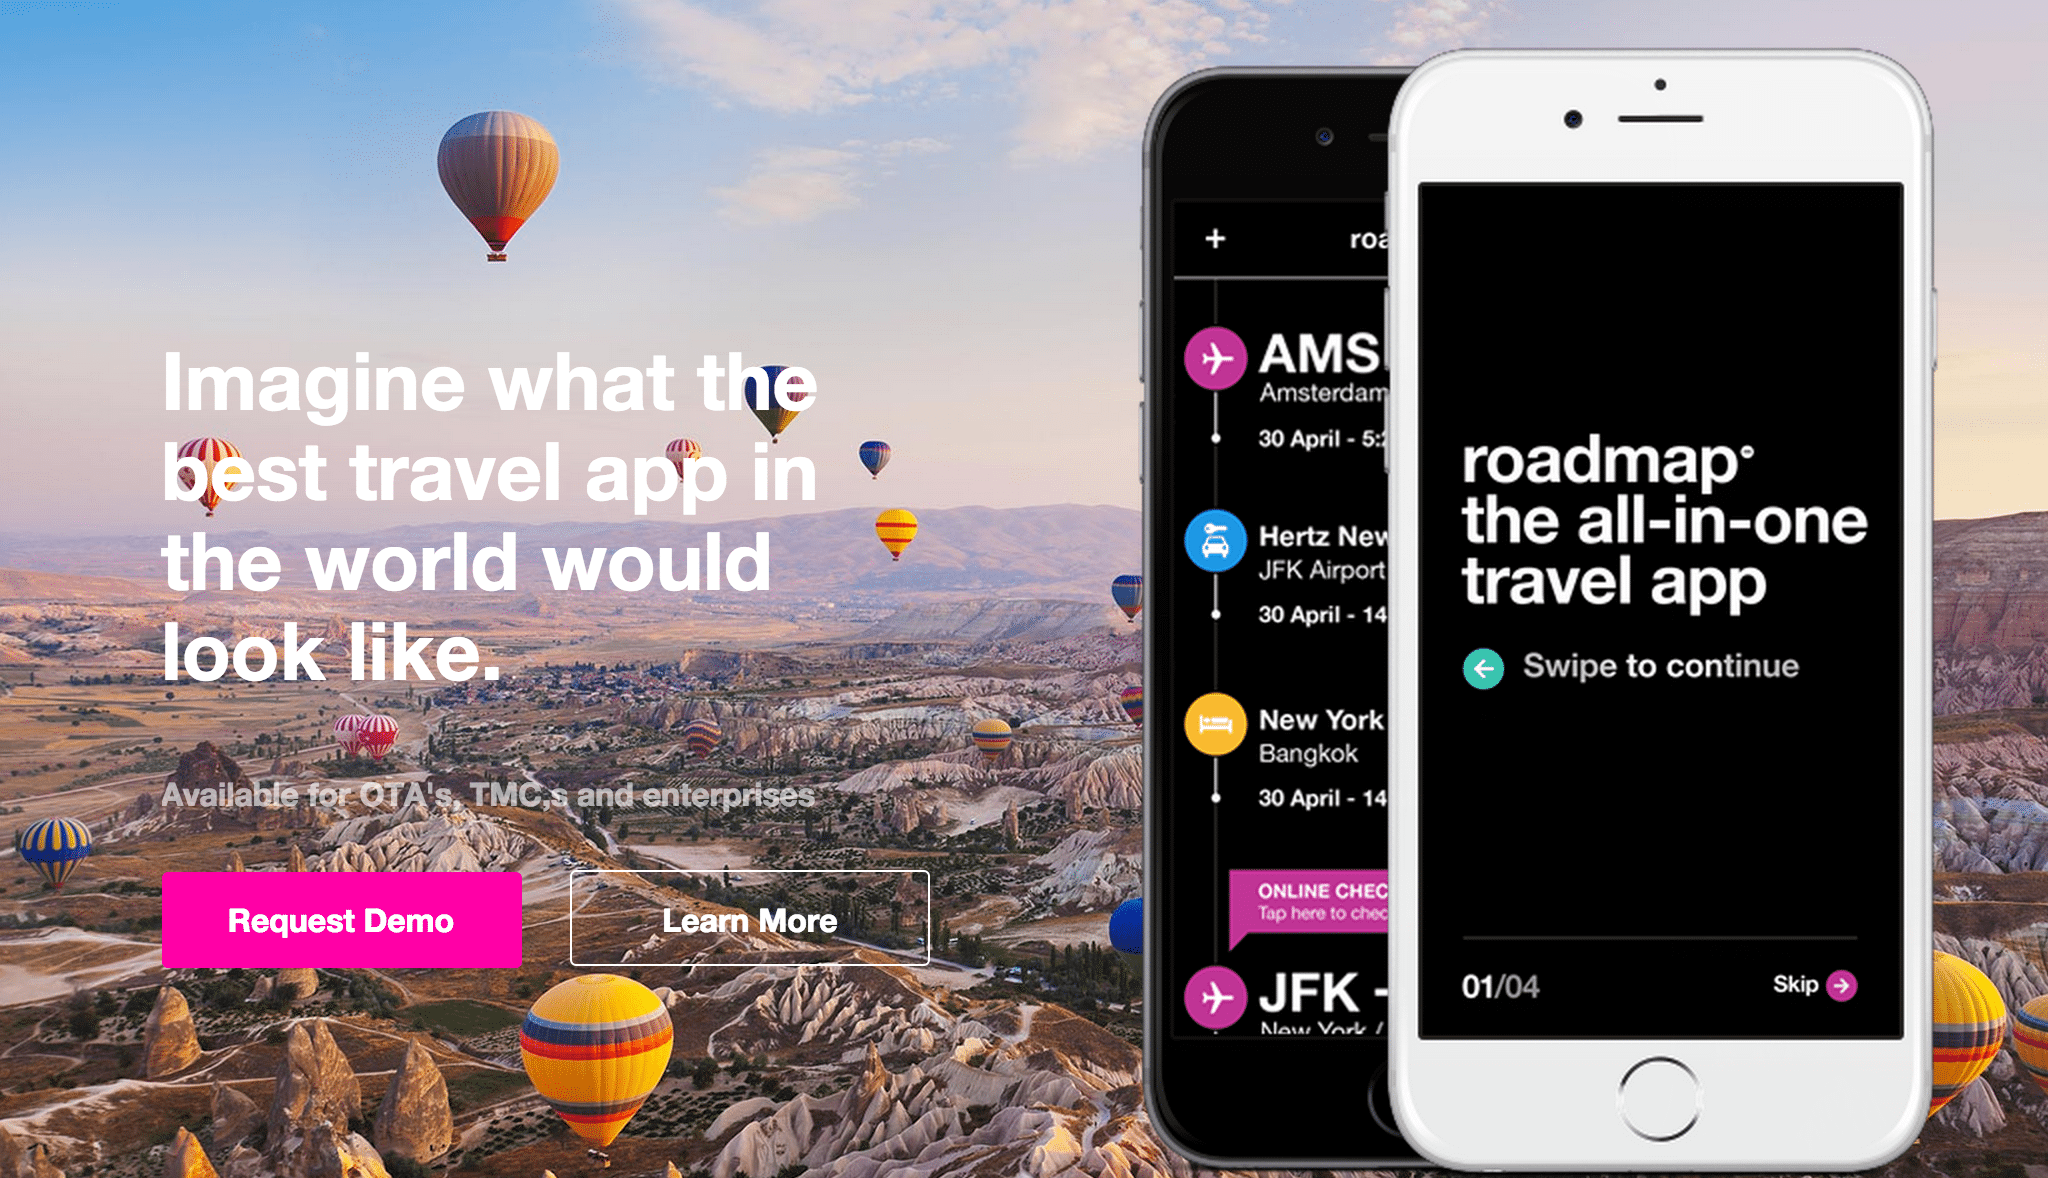 Roadmap is a mobile app focused on creating the perfect trip itinerary.